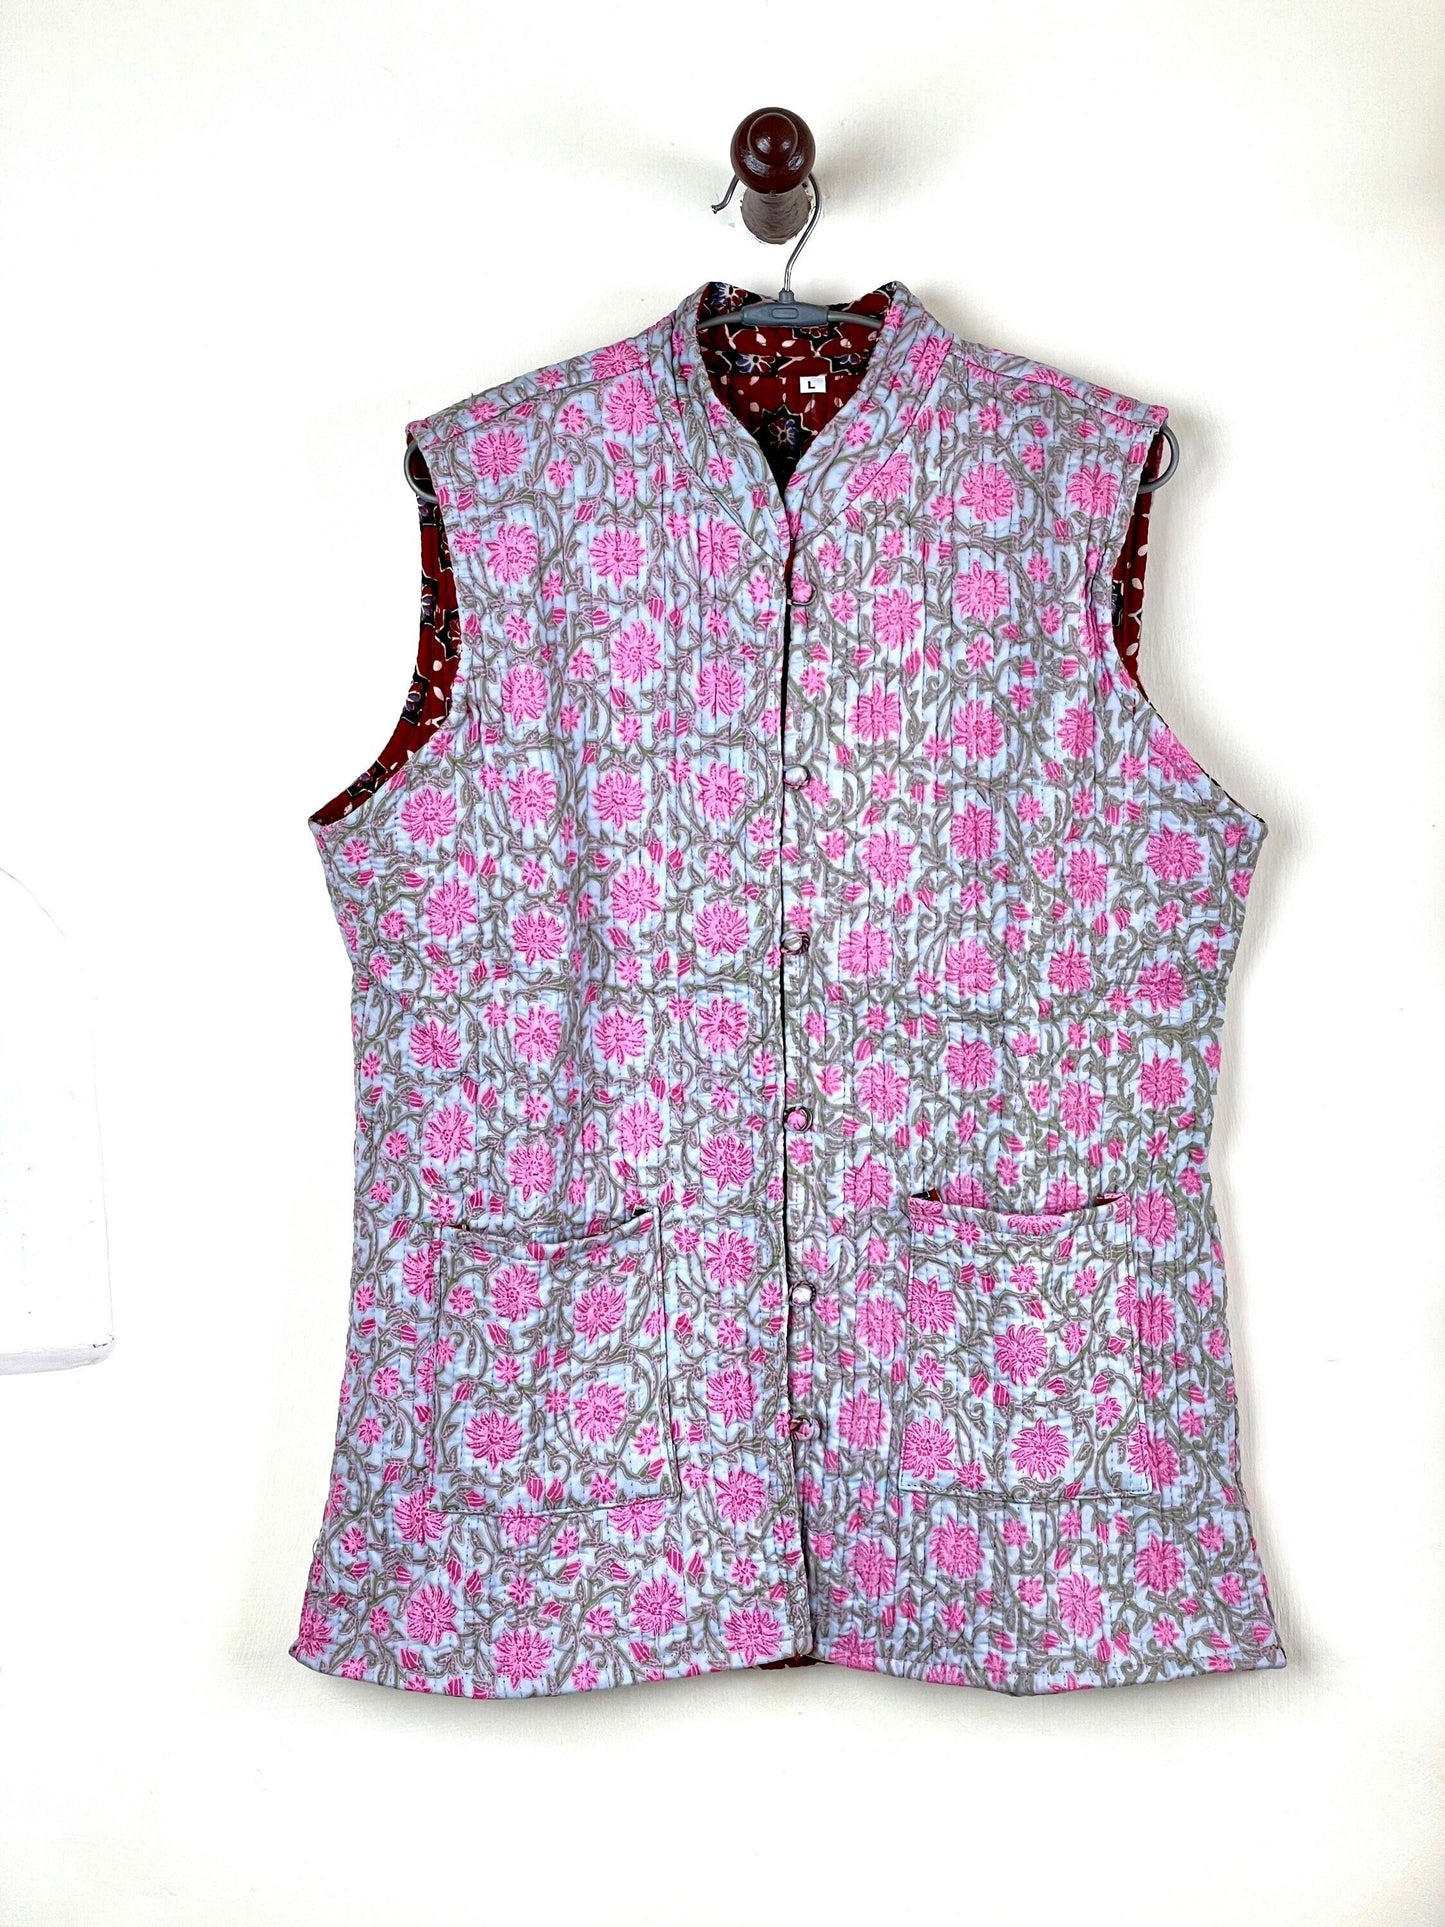 Indian Handmade Quilted Cotton Sleeveless Jacket Grey & Pink Stylish Women's Coat, Reversible Jacket for Her